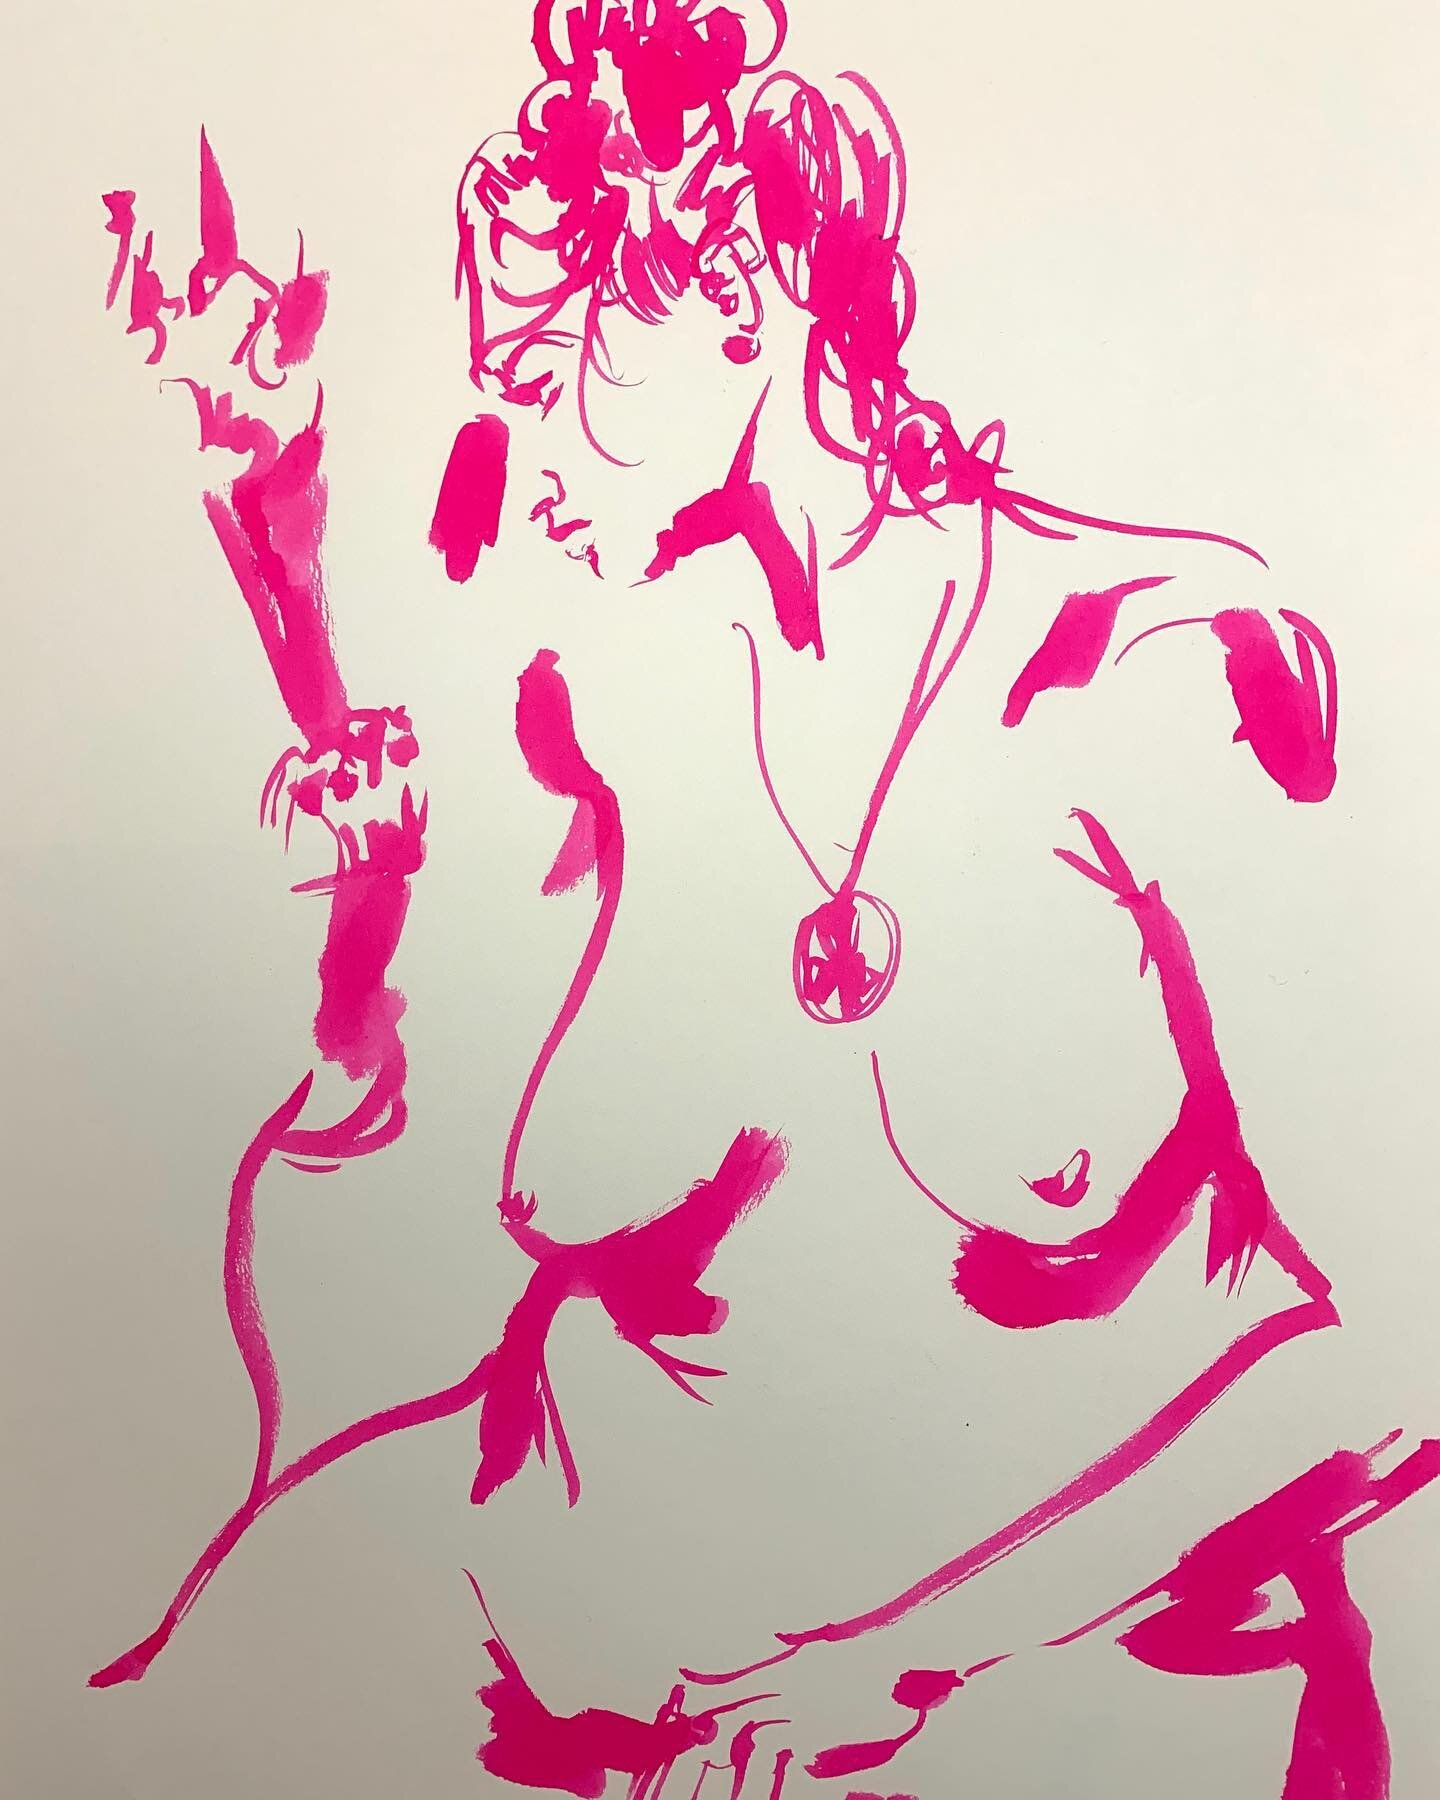 Had a blast last night at @ahafineart w/ le muse de @melaniejadefig and lots of other talented artists. Good to be back.
.
.
.
#figuredrawing #artist #model #drawingsketch #sketchbook